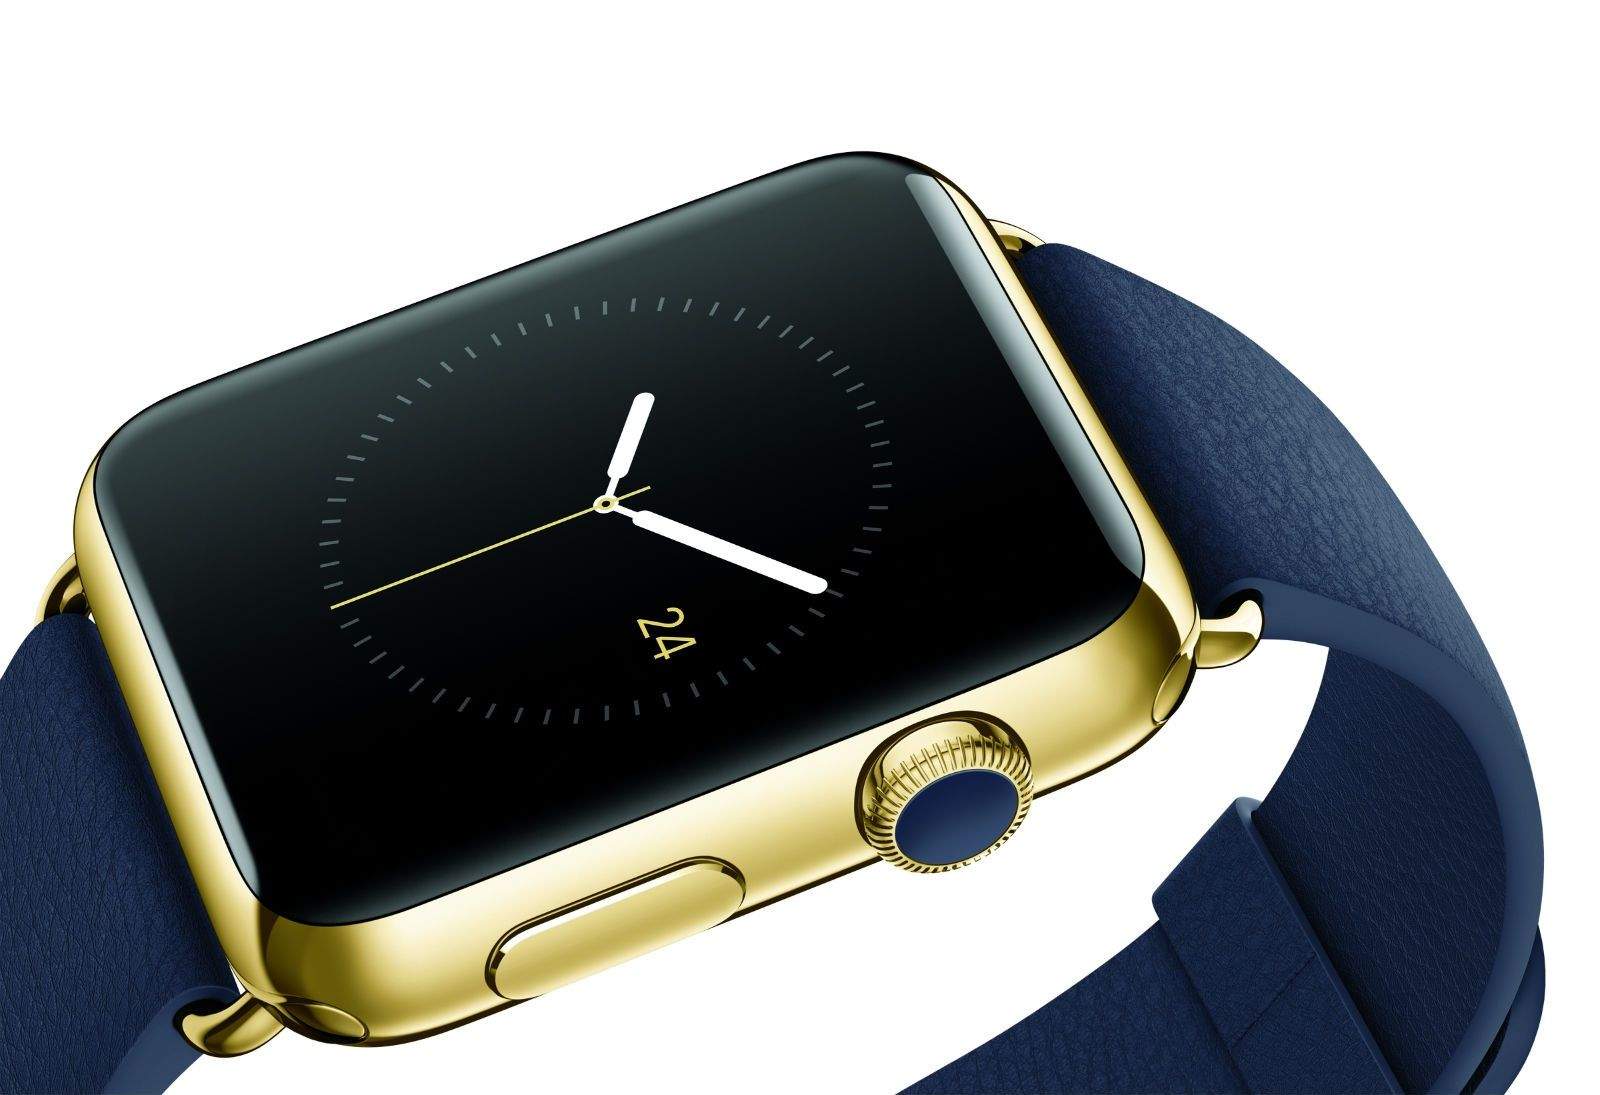 The definitive guide to buying an Apple Watch
